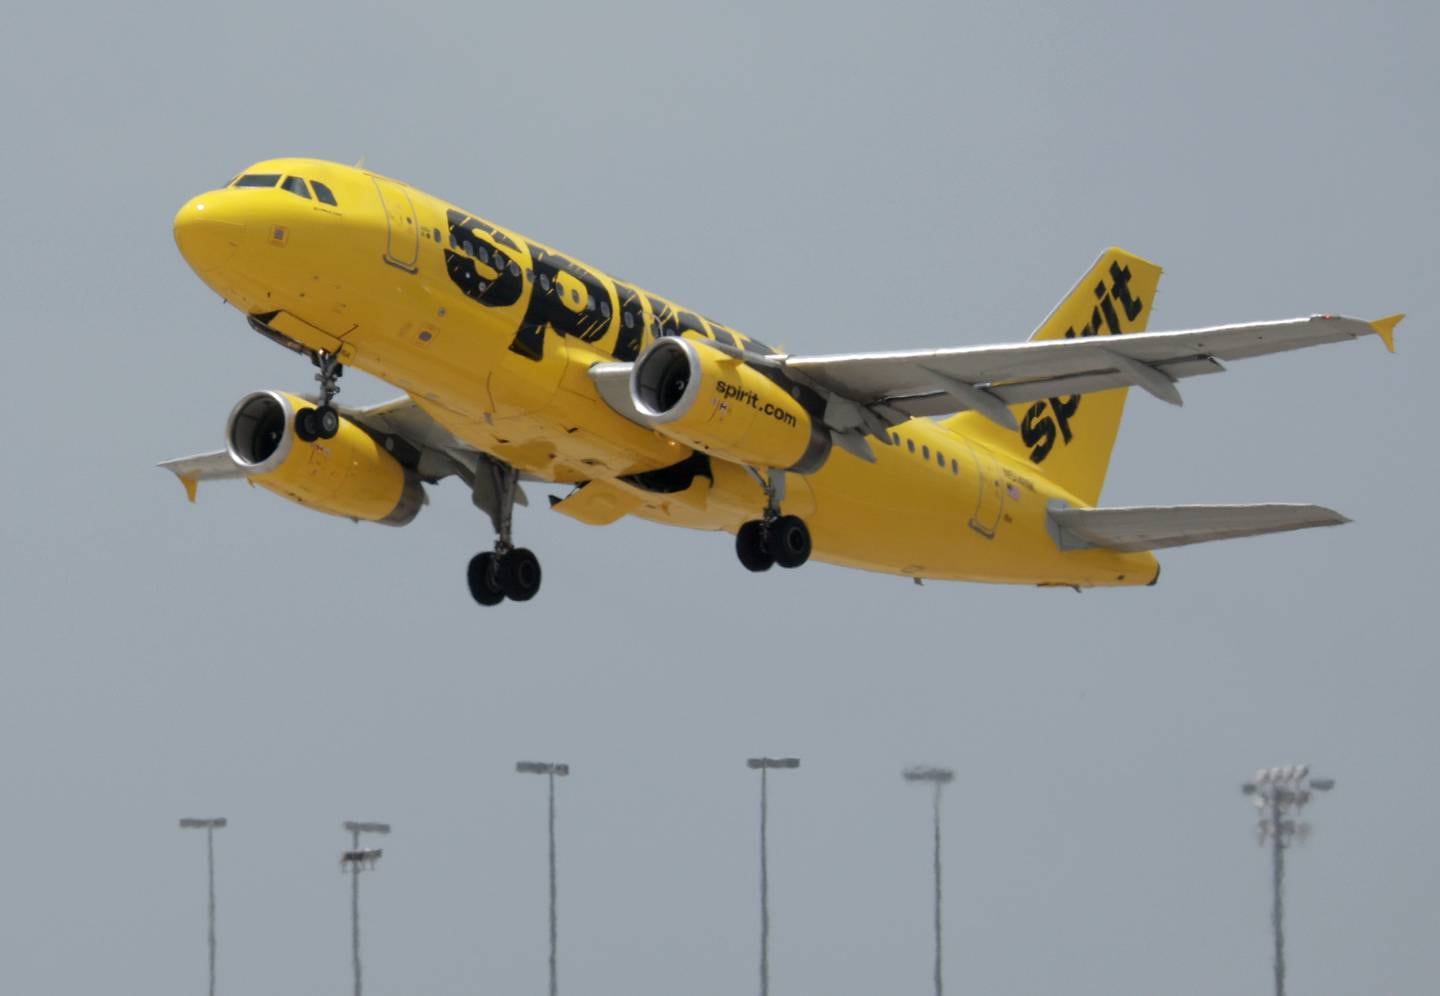 A Spirit airlines plane takes off from Miami International Airport on July 27, 2022 in Miami, Florida. Spirit Airlines Inc. shareholders are voting whether to merge with Frontier Airlines or JetBlue Airways Corp.